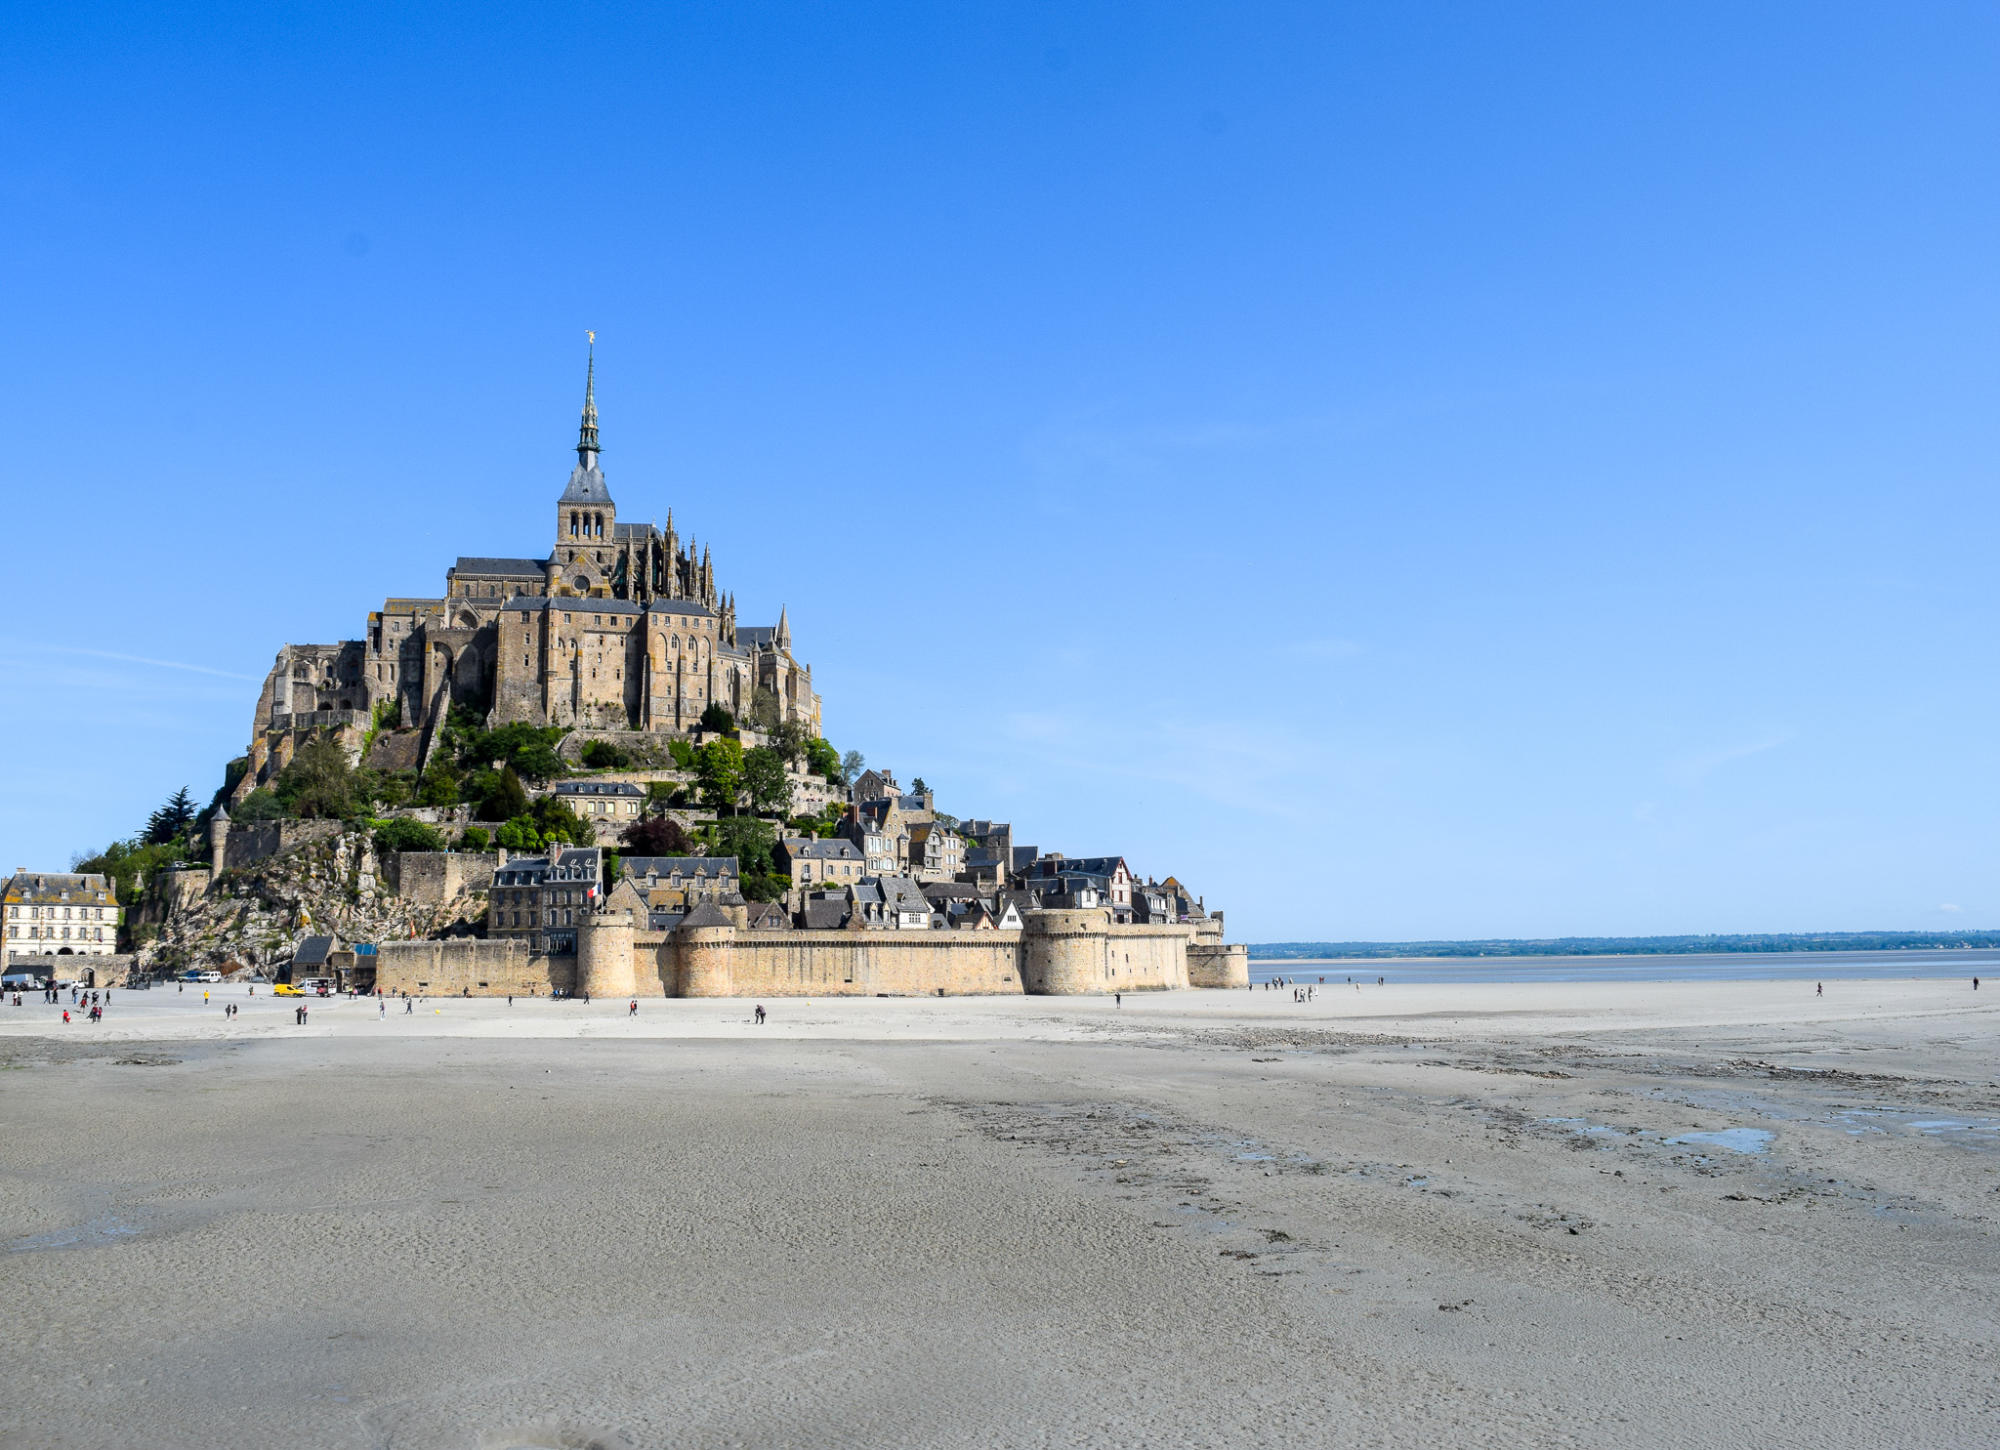 Normandy, Brittany, and the Loire Valley